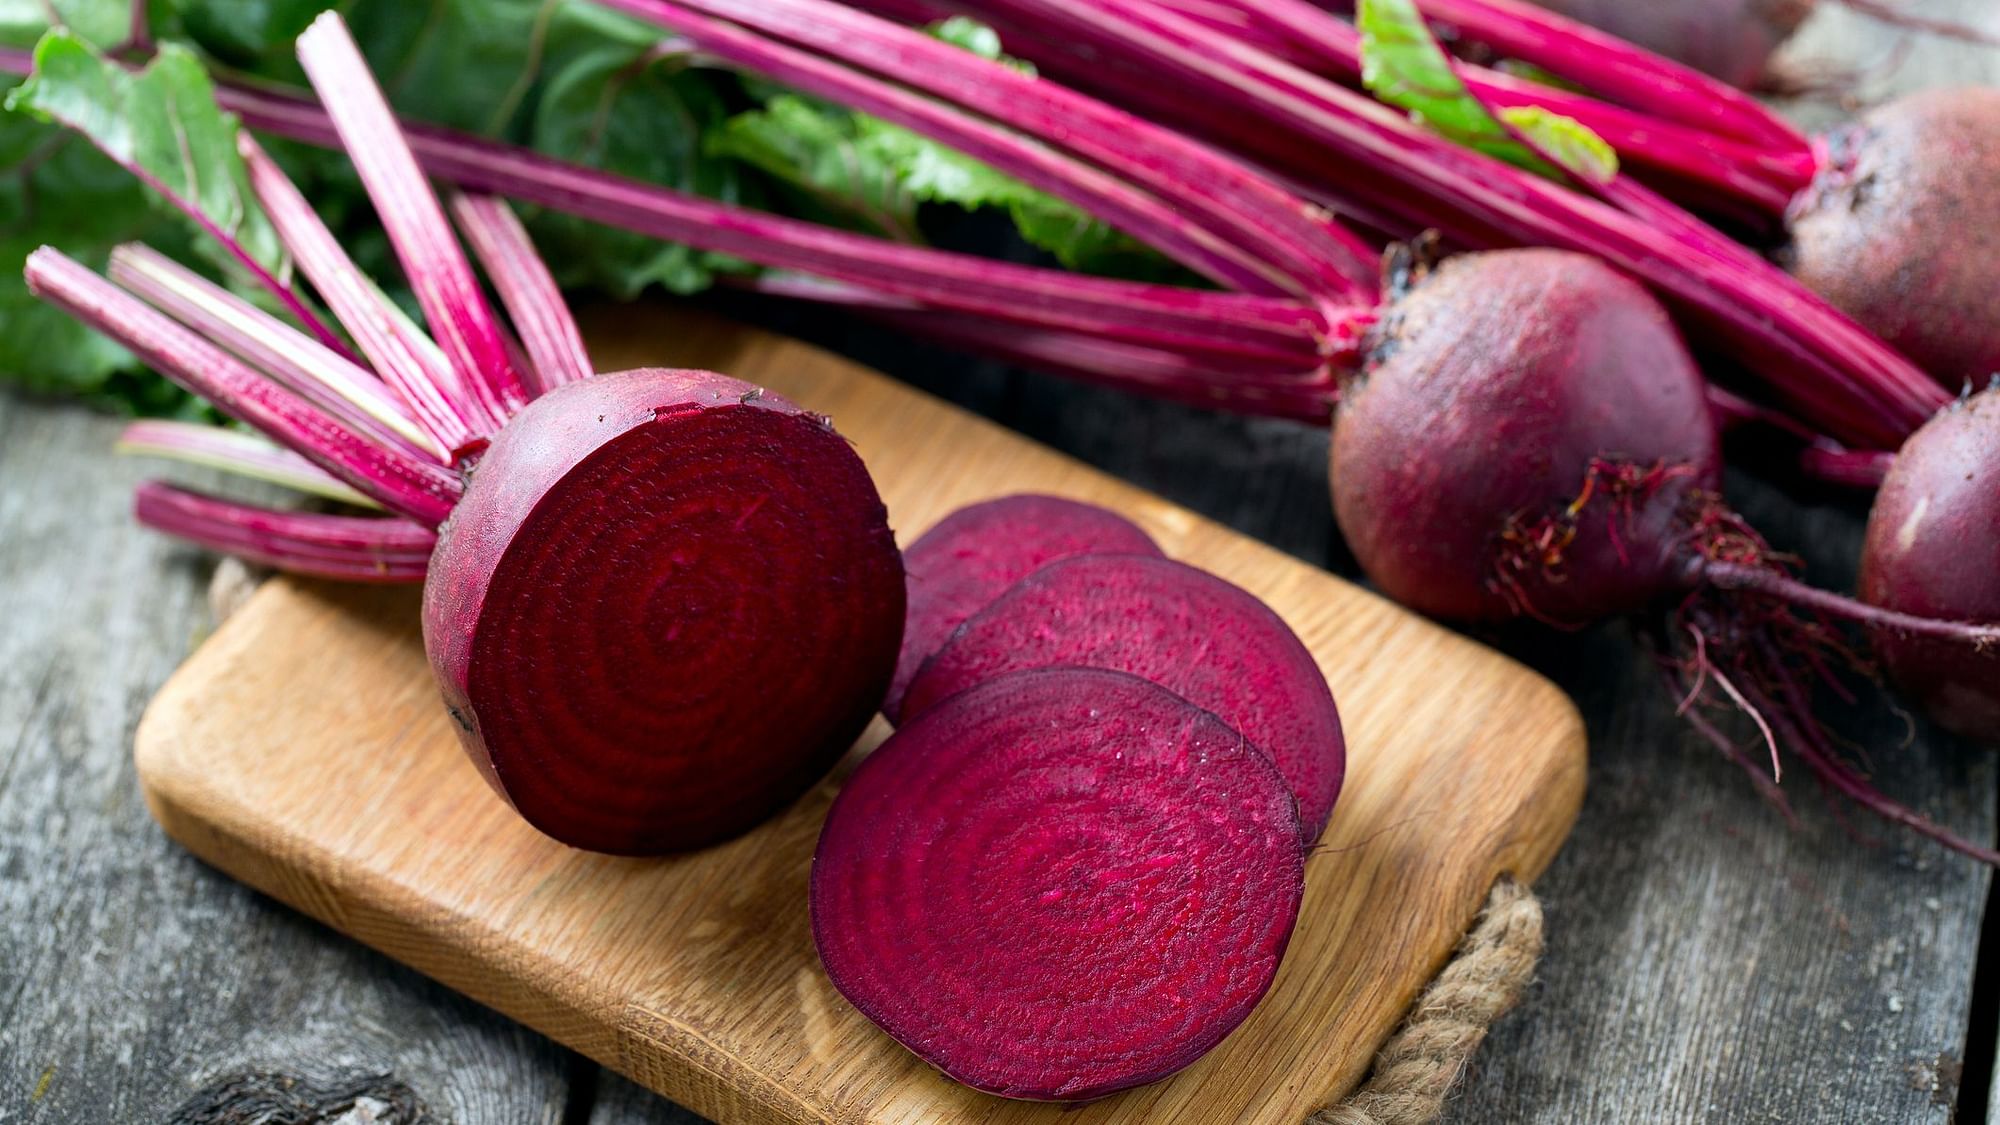 Beetroot has a lot of nutrients like protein, fiber, vitamins, iron, etc.